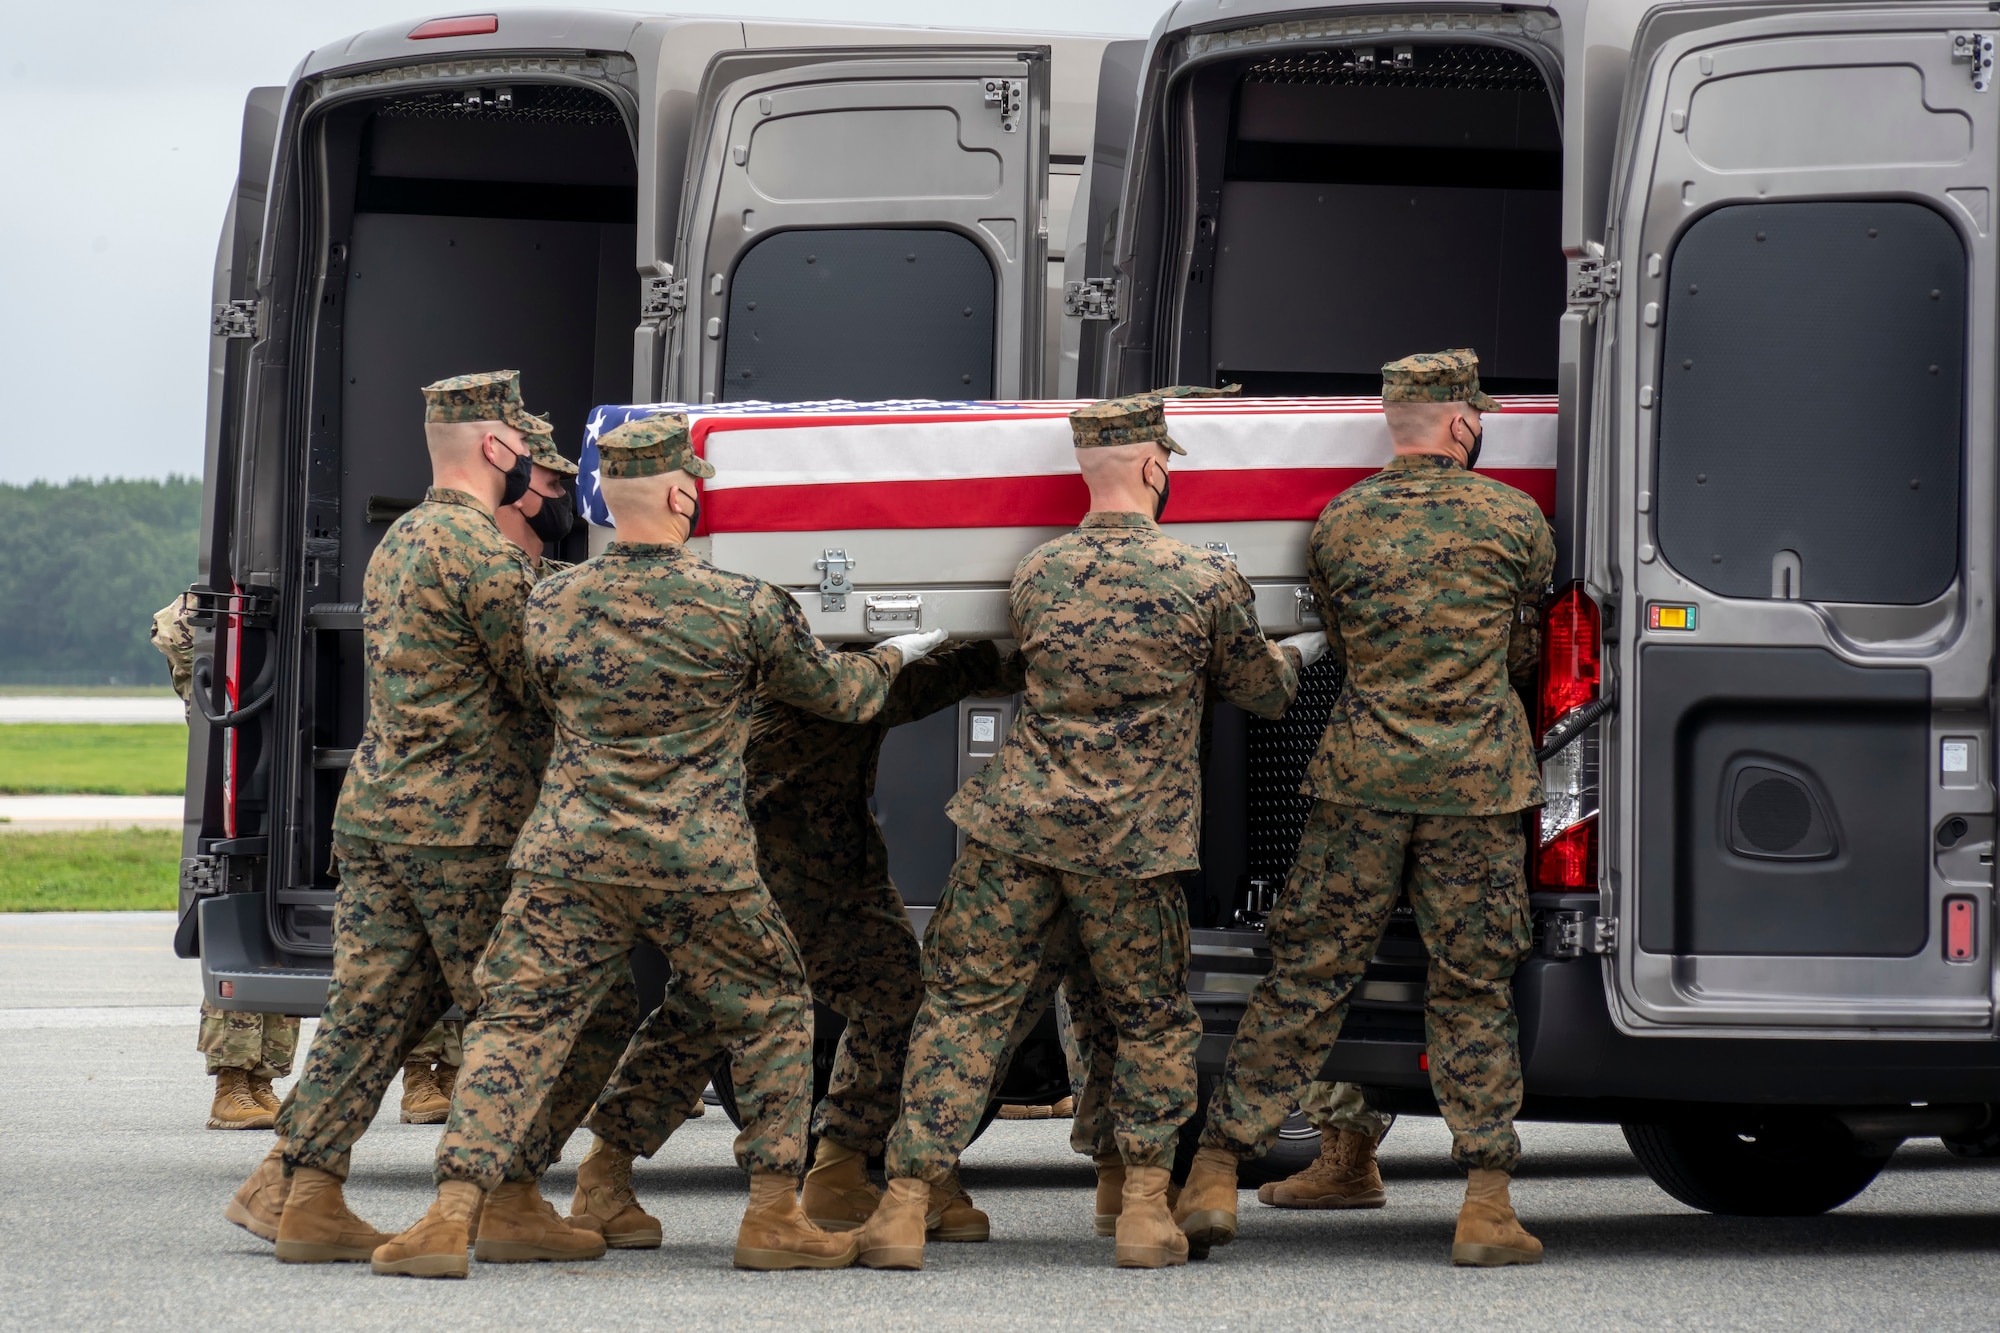 A U.S. Marine Corps carry team transfers the remains of Marine Corps Lance Cpl. David L. Espinoza of Rio Bravo, Texas, Aug. 29, 2021 at Dover Air Force Base, Delaware. Espinoza was assigned to 2nd Battalion, 1st Marine Regiment, 1st Marine Division, I Marine Expeditionary Force, Camp Pendleton, California. (U.S. Air Force photo by Jason Minto)